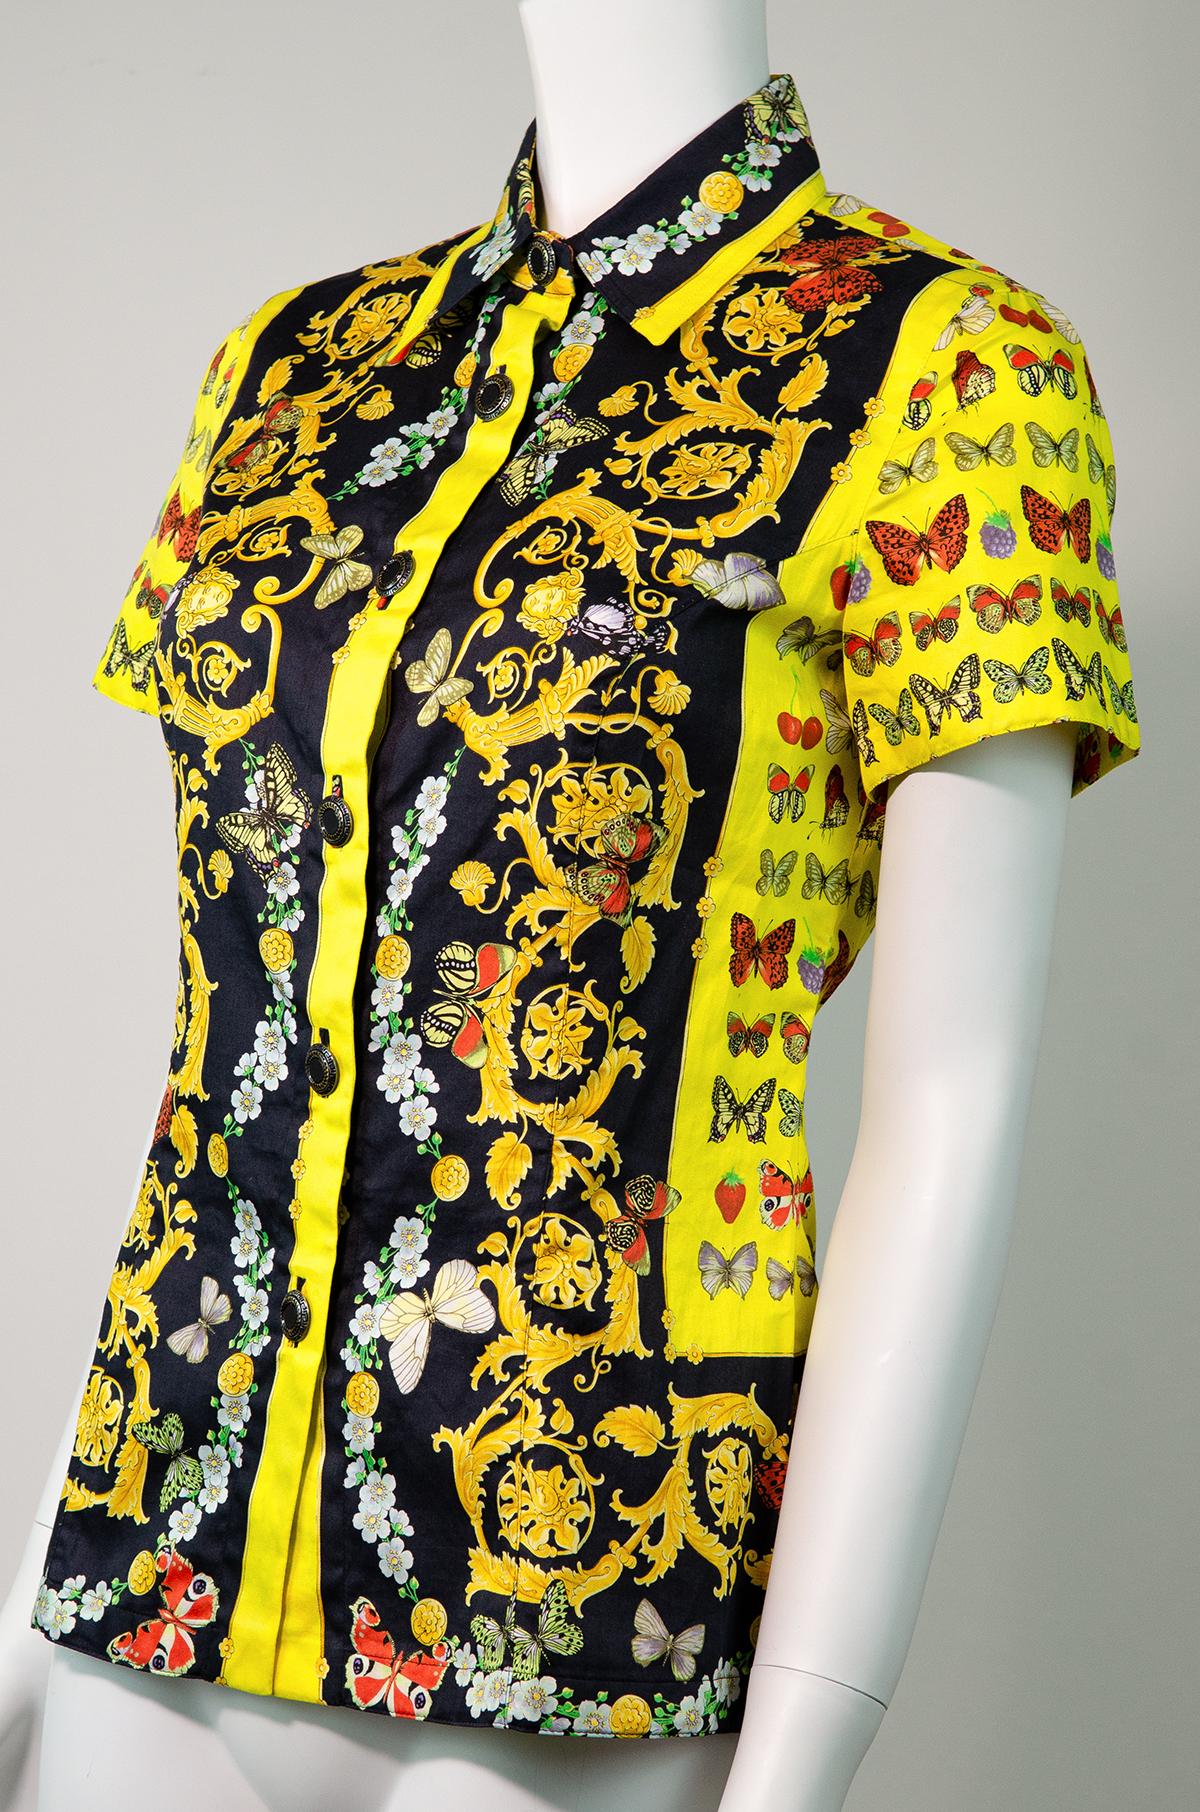 VERSACE Vintage S/S 1995 Iconic Baroque Butterfly Print Shirt

Brand: Versace Couture

Designer: Gianni Versace

Collection / Year: Spring Summer 1995

Fabric: Cotton

Color: Yellow / Black / Multi 

Size: XS

The iconic butterfly print made its